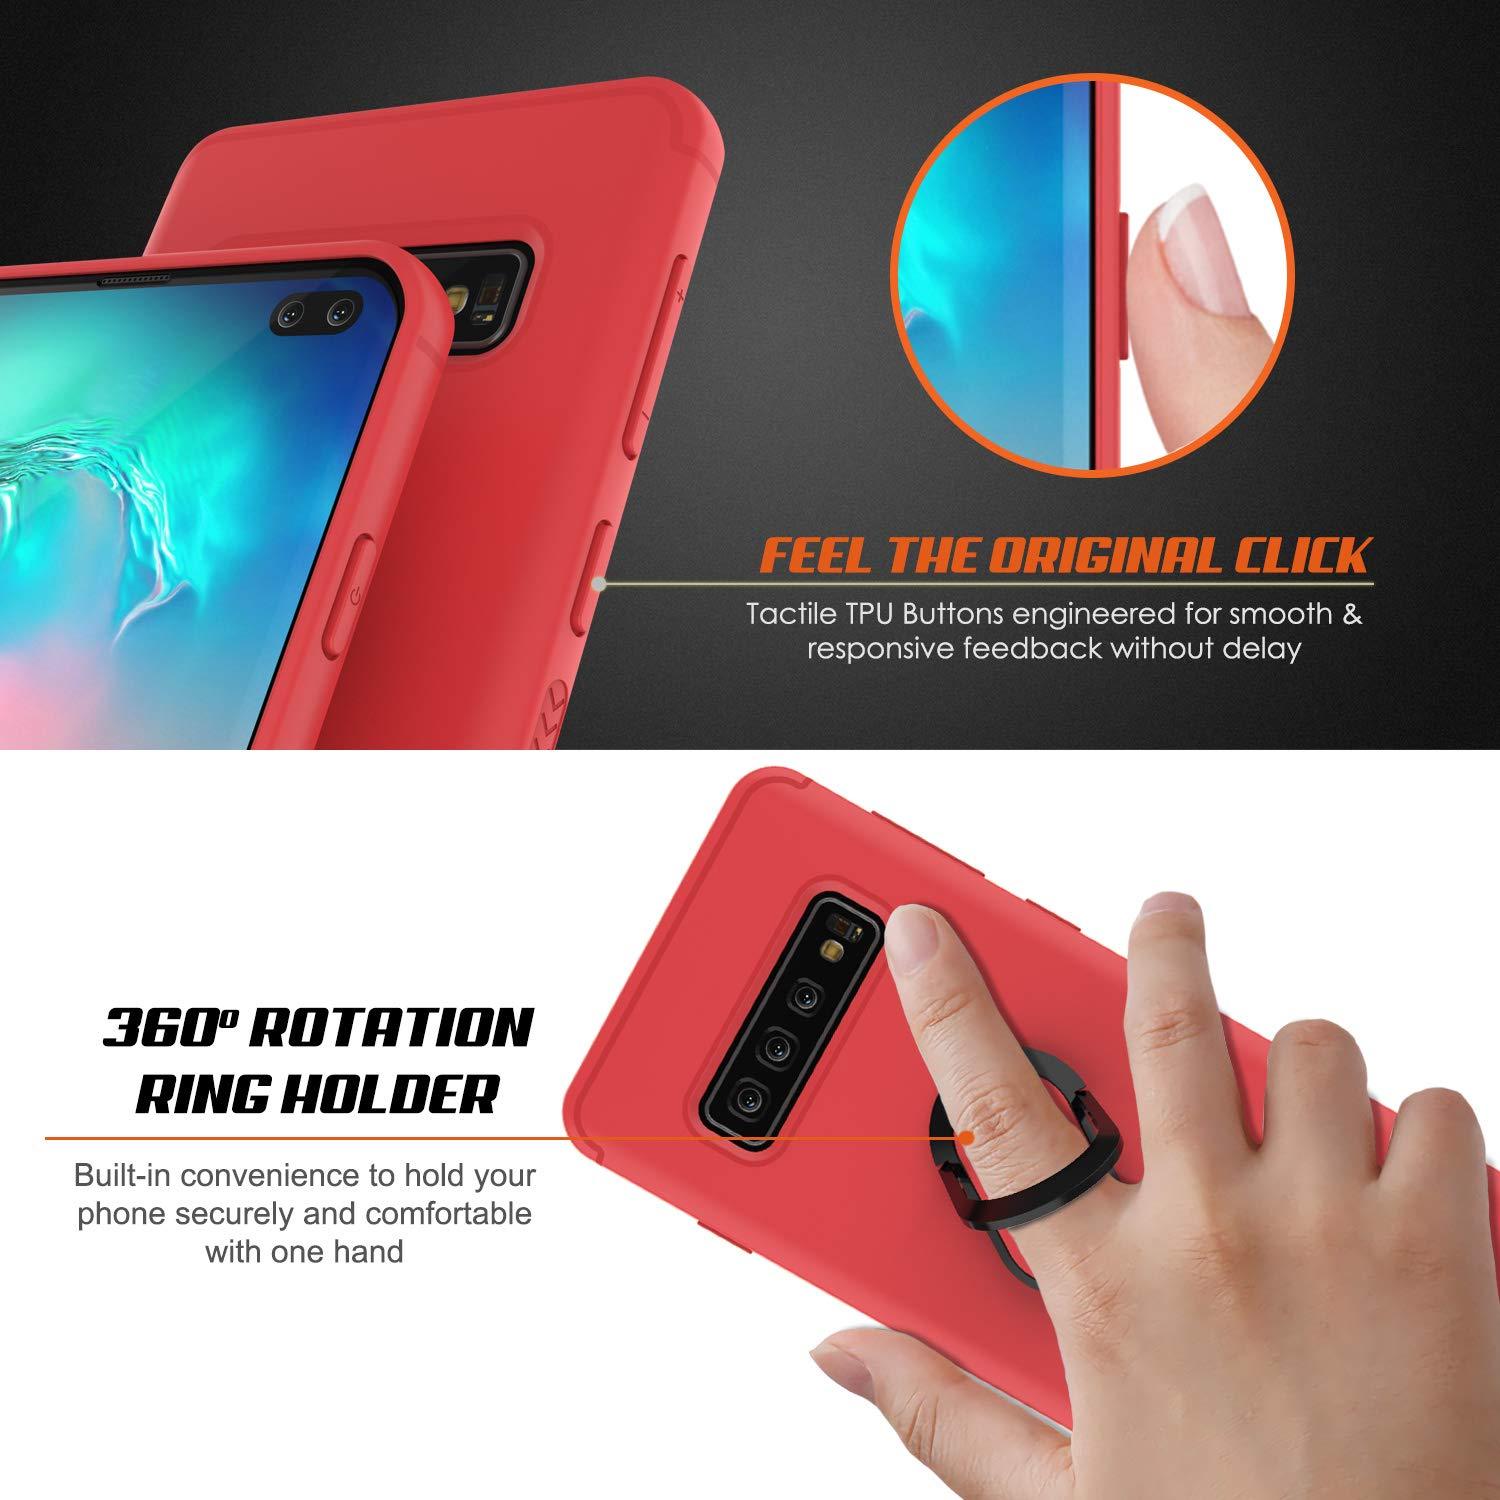 Galaxy S10+ Plus, Punkcase Magnetix Protective TPU Cover W/ Kickstand, Sceen Protector[Red]